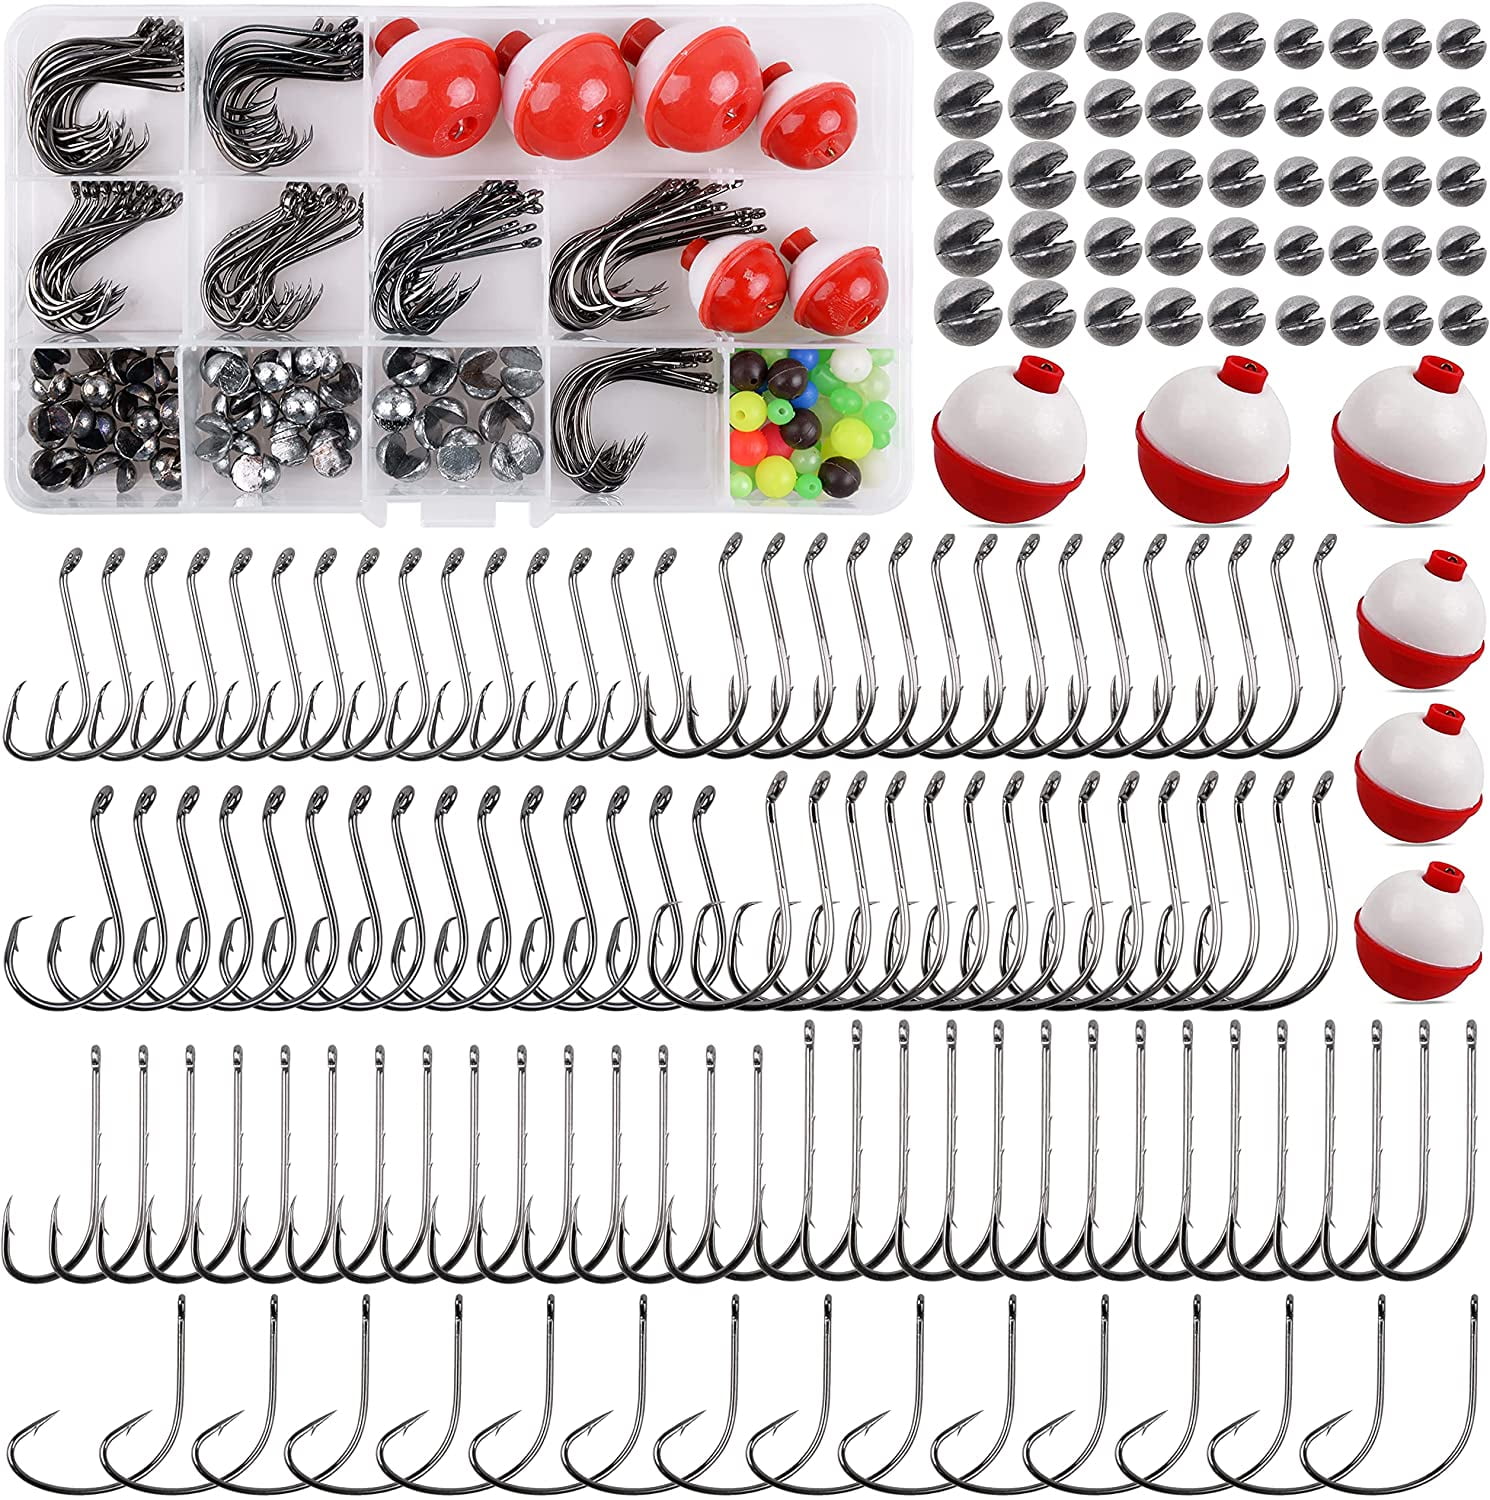 Fishing Hooks and Weights Fishing Bobber Tackle Kit,186PCS Catfish Gear  Tackle Box Included Fishing Hooks Bobbers Starter Fishing Accessories